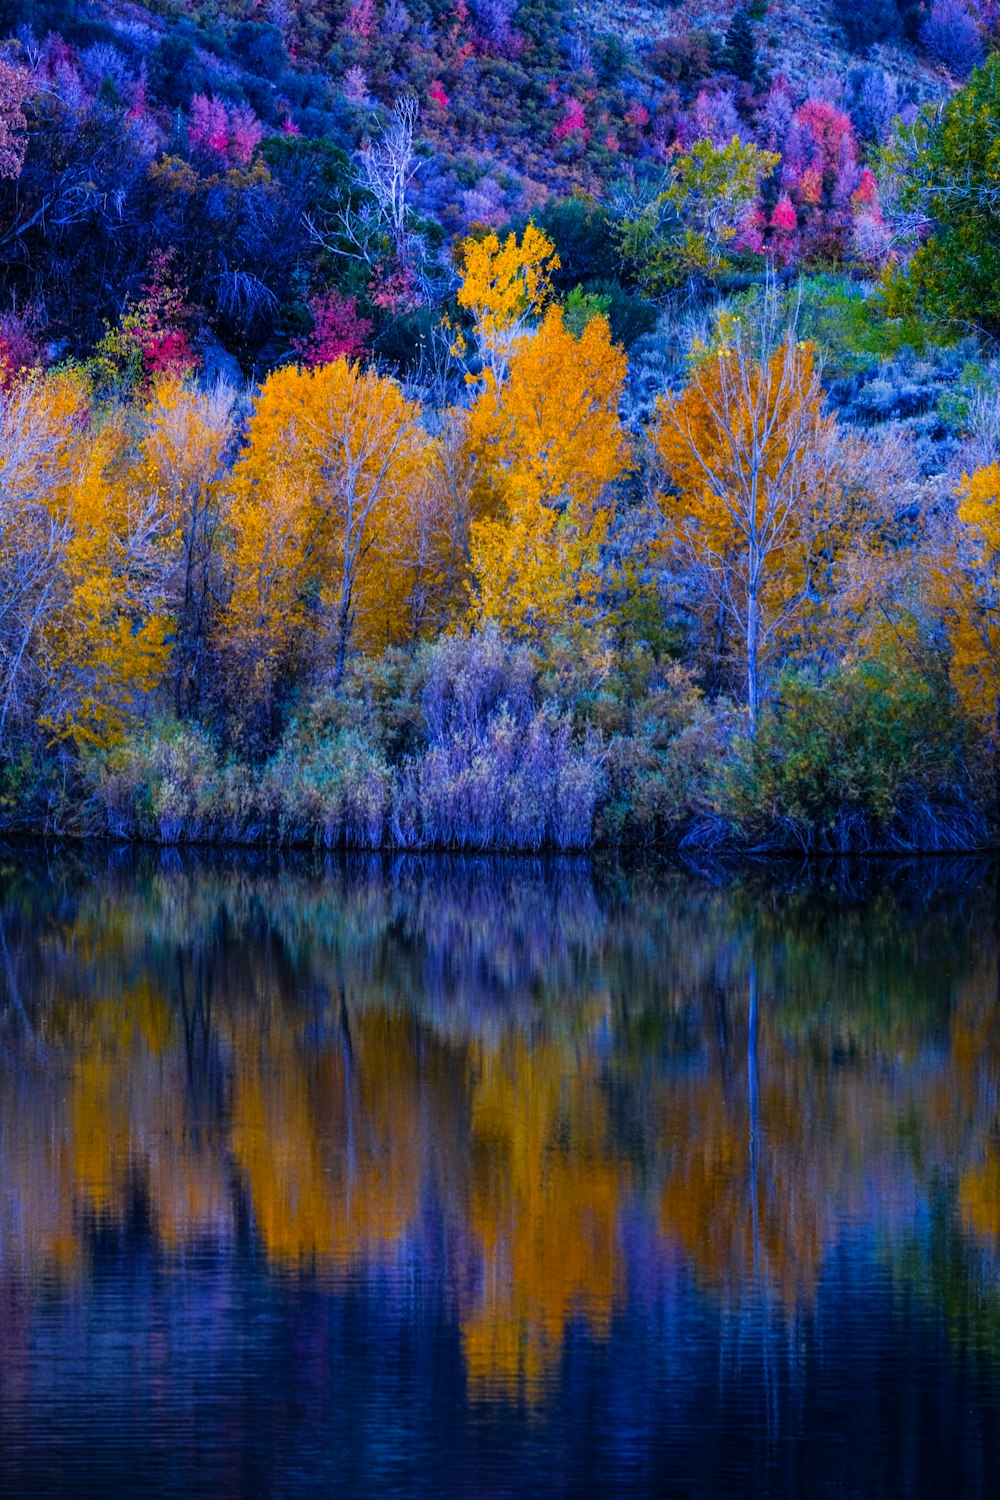 a body of water surrounded by colorful trees